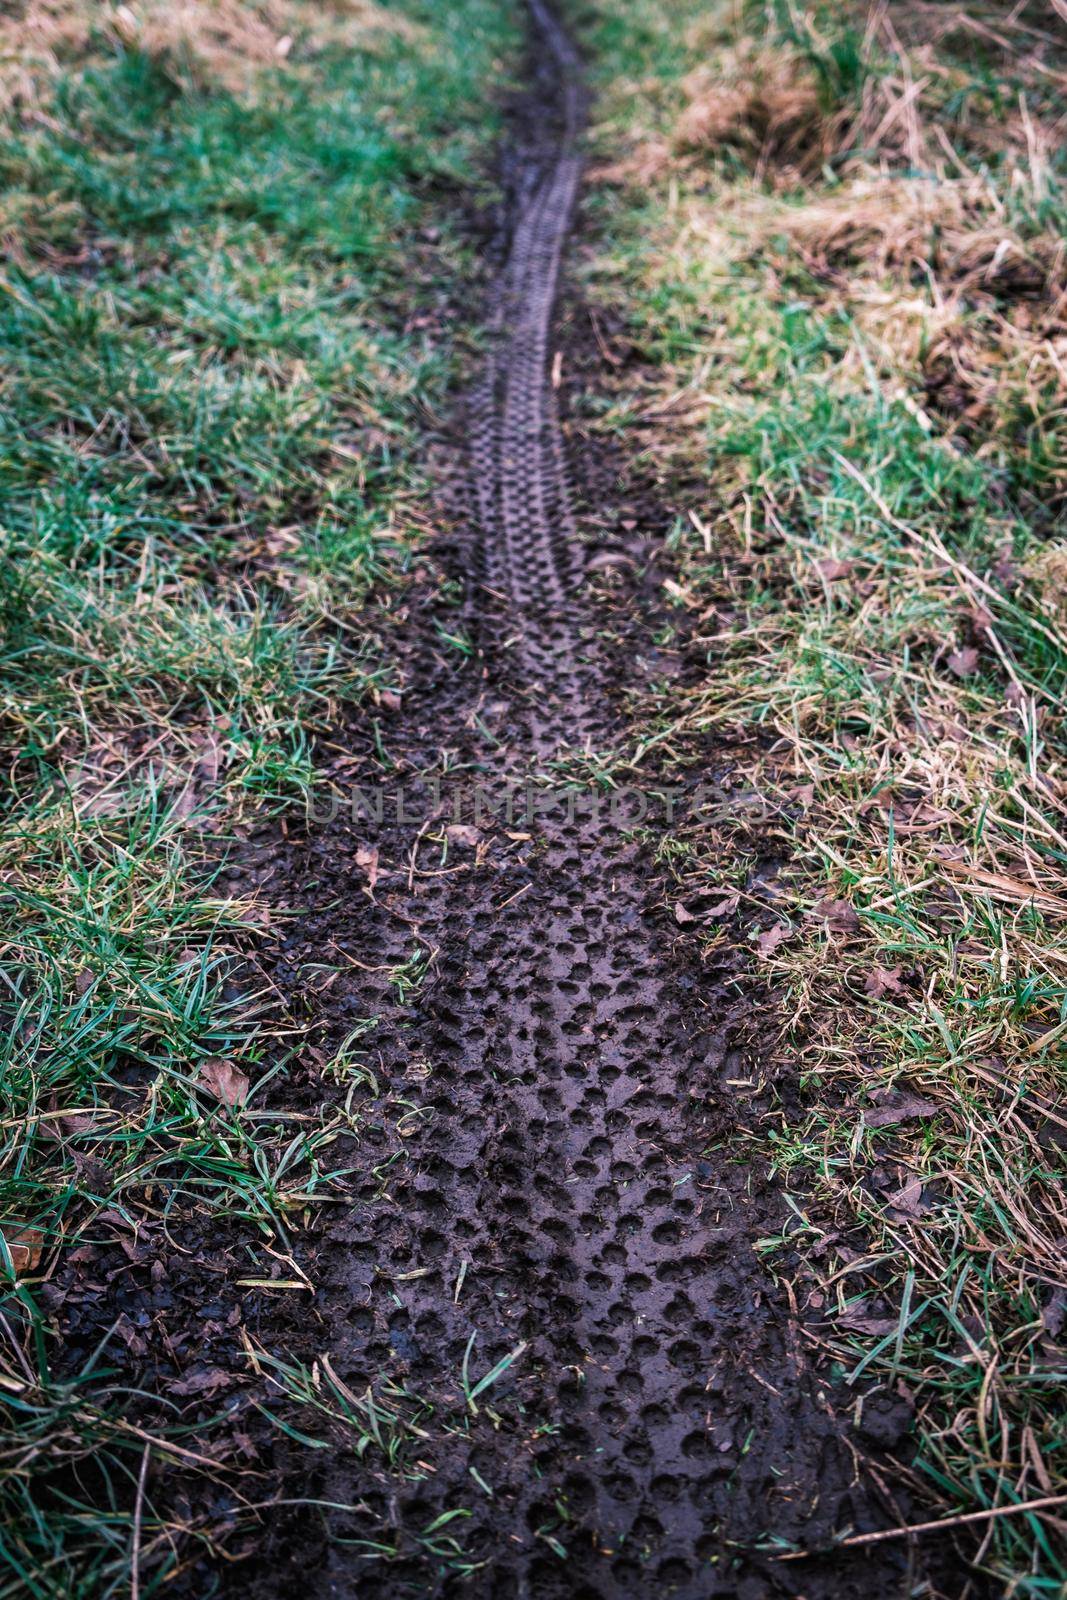 Sports Image Of Mountain Bike Tire Tracks In Wet Mud